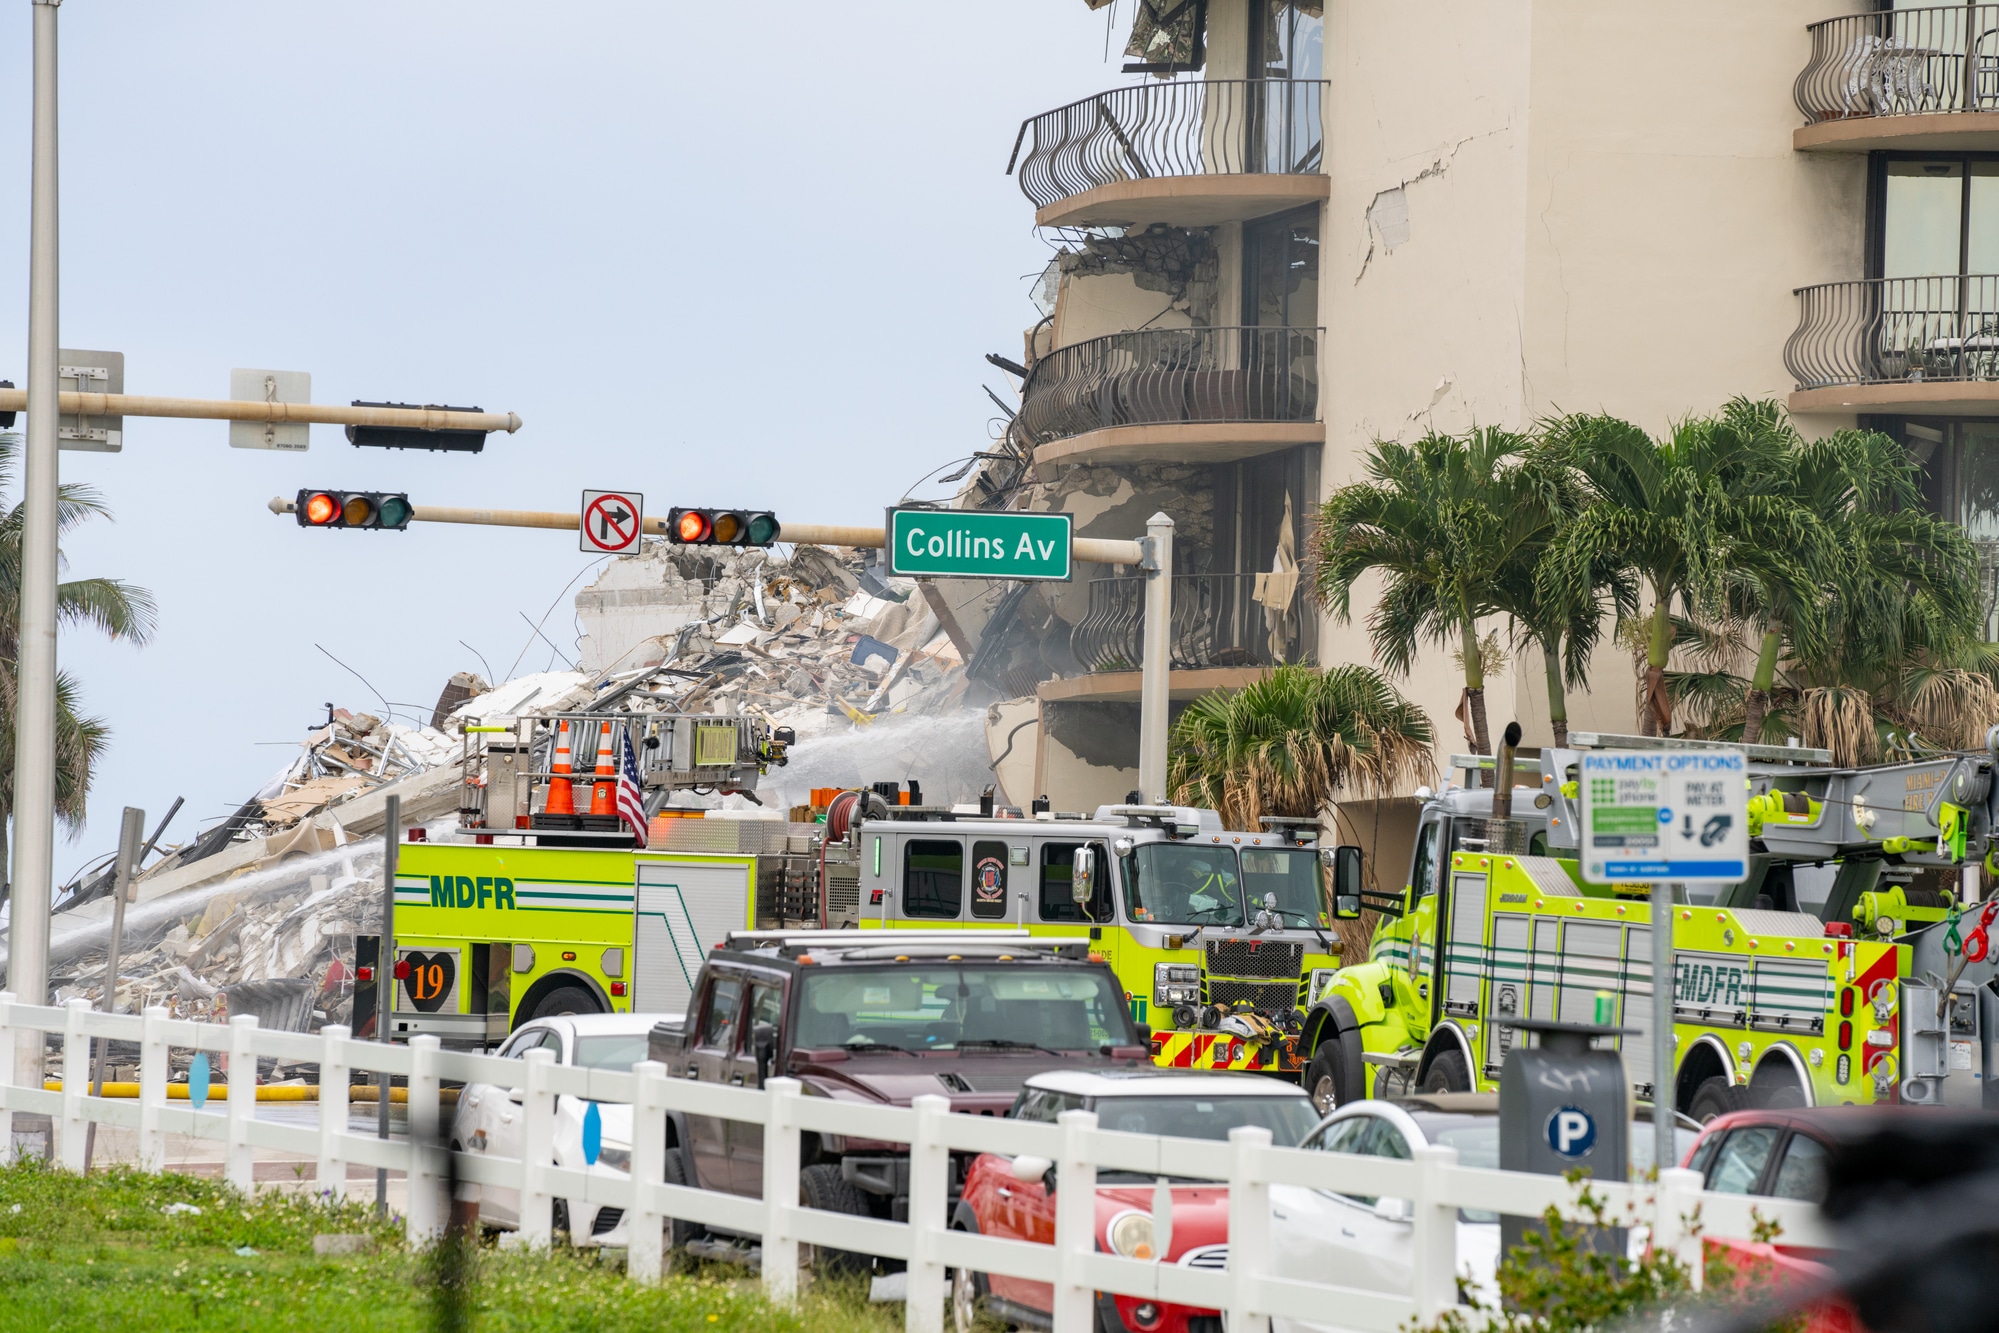 Surfside Condo building collapse with emergency crew trucks